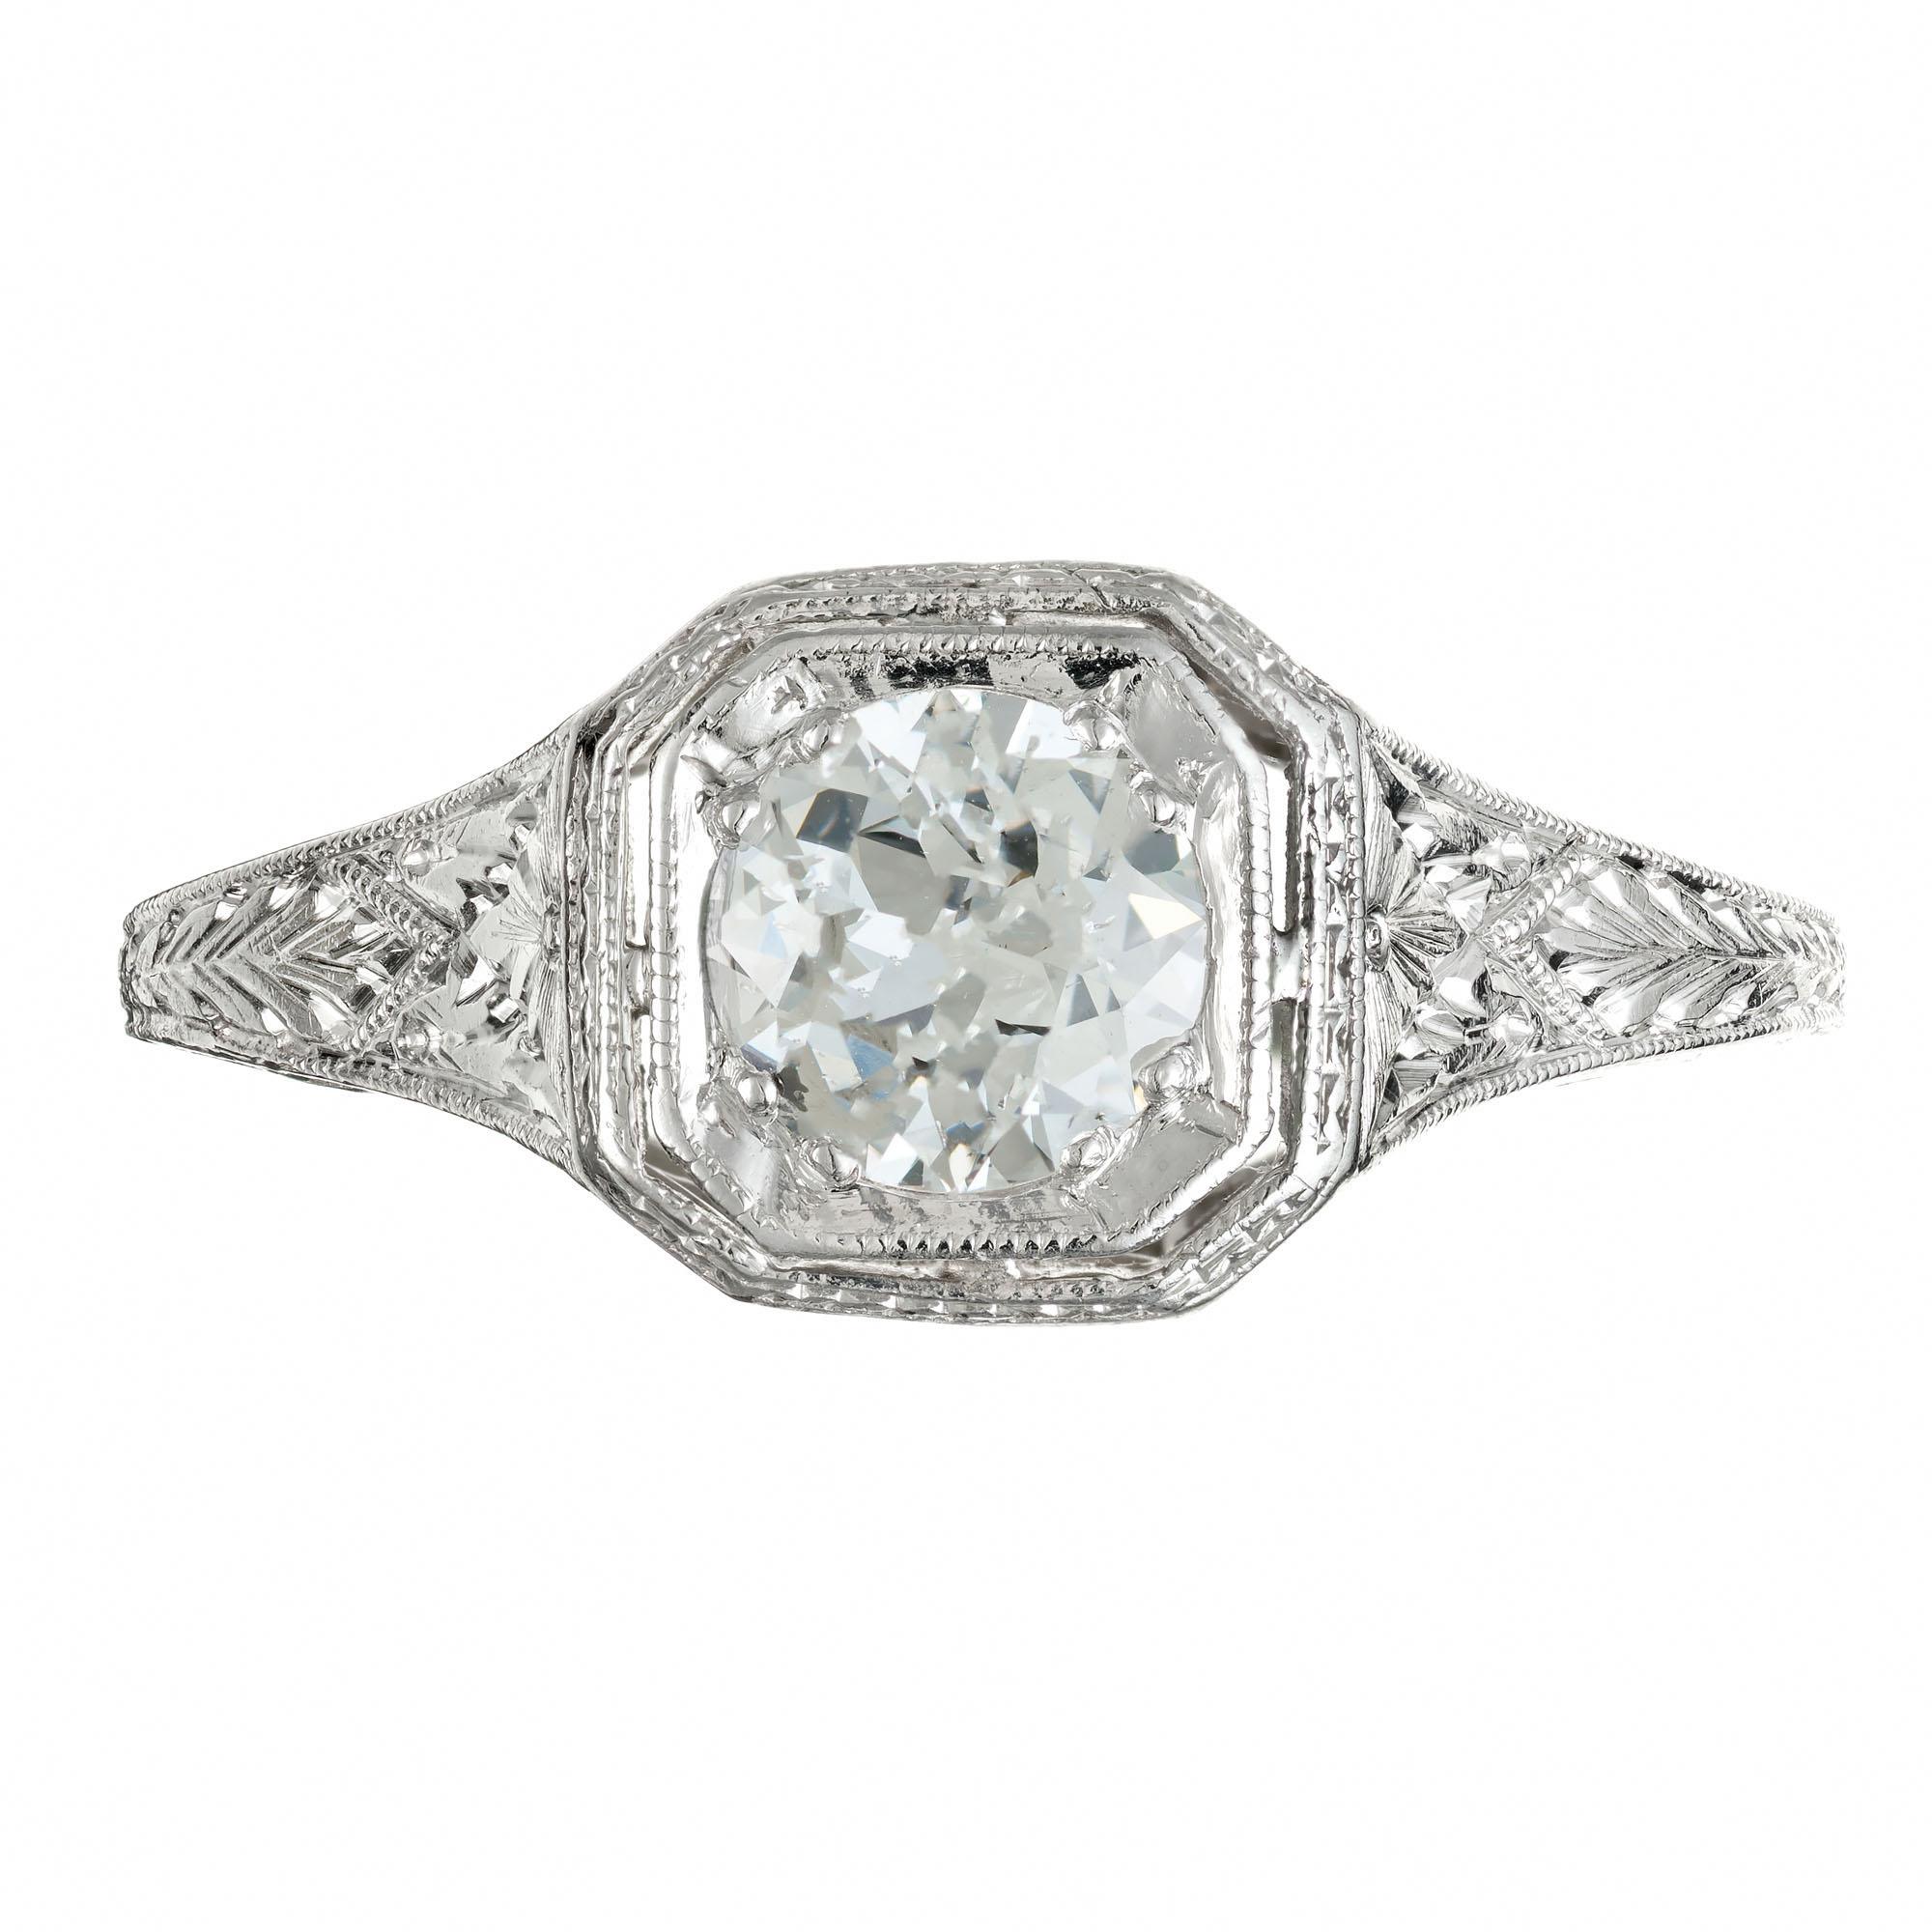 1935 Edwardian design diamond engagement ring. EGL certified round brilliant cut center diamond, in a hand pierced filigree engraved platinum setting. 

1 round brilliant cut diamond, H-I I approx. .55cts  EGL certified# 4001509546D
Size 7 and